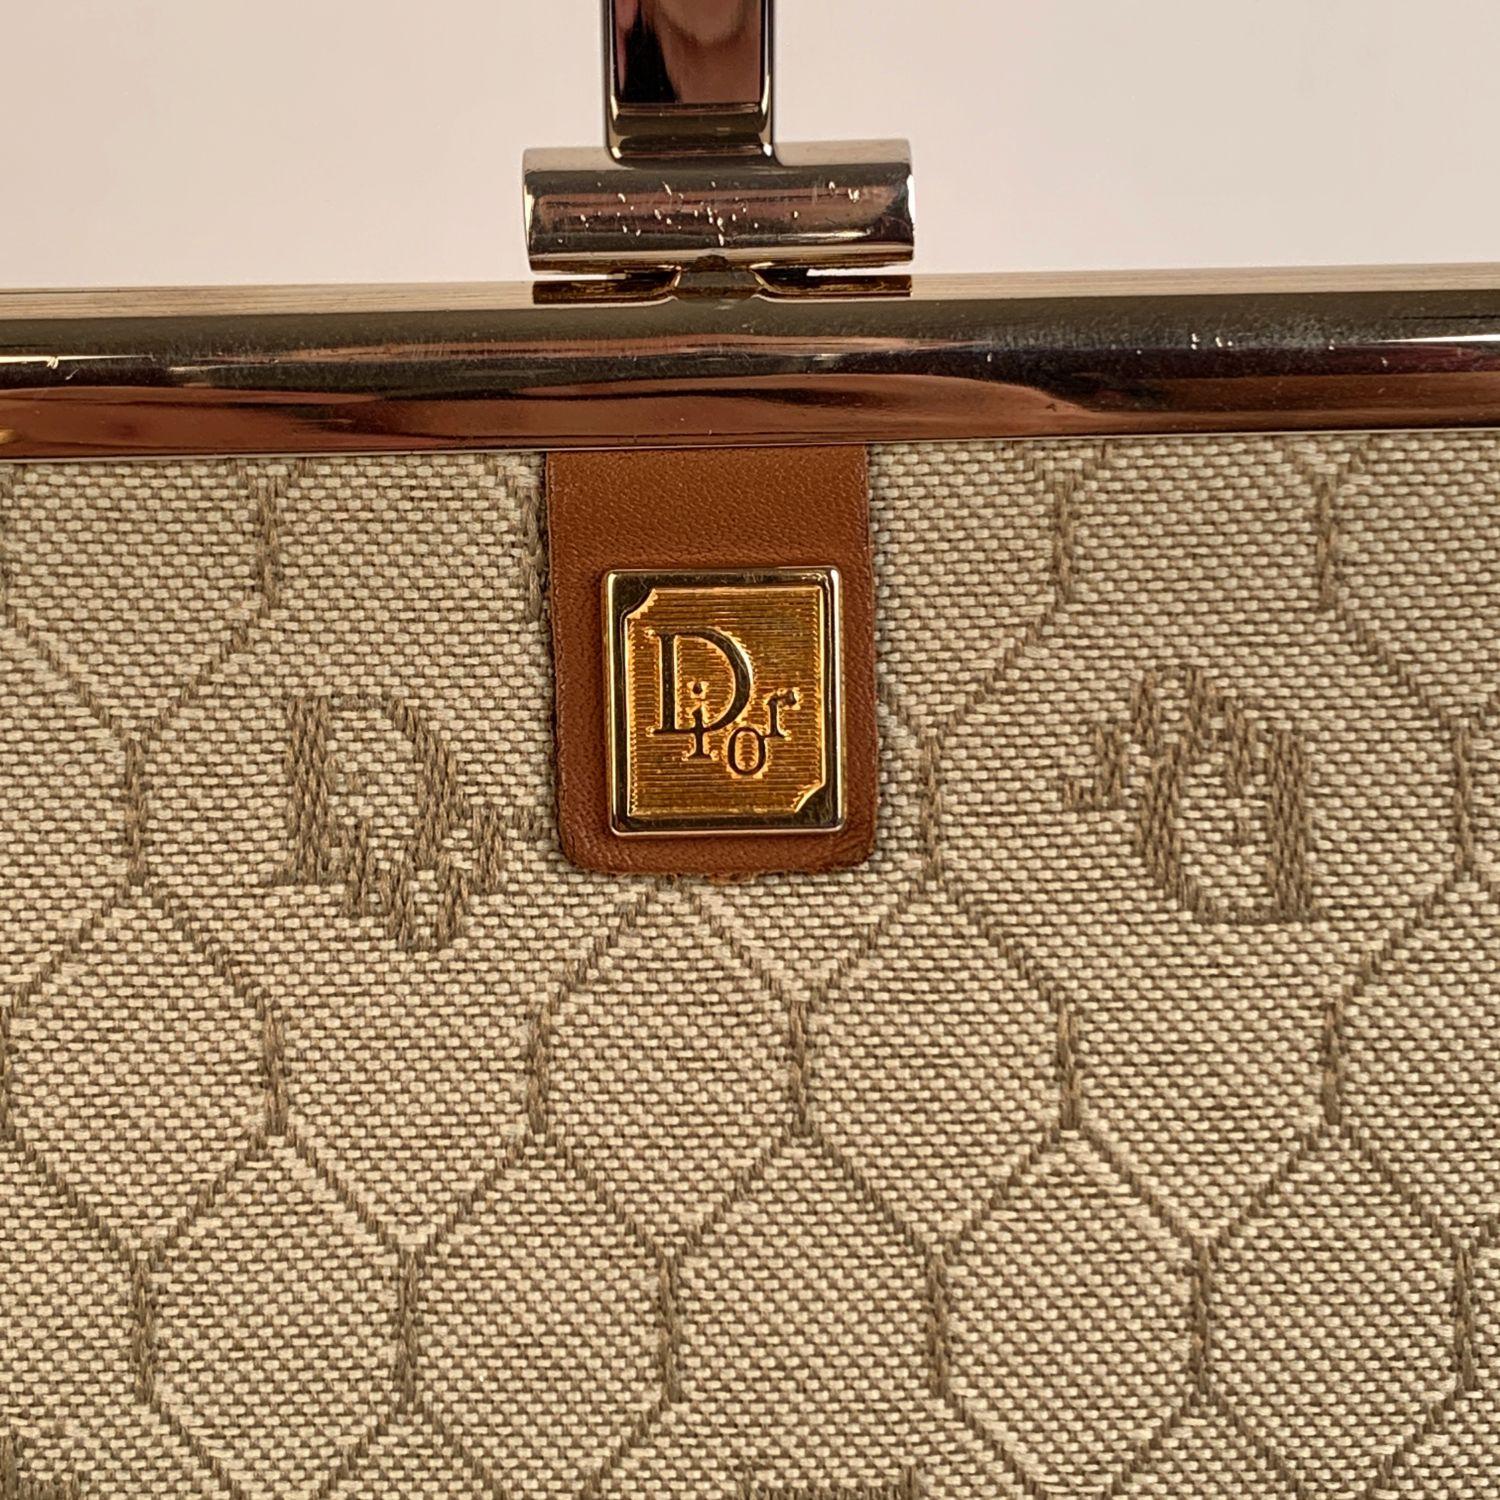 Vintage CHRISTIAN DIOR beige logo canvas with tan leather trim. Clasp closure on top. Beige leather lining. 'Christian Dior - made in France' embossed inside.



Details

MATERIAL: Canvas

COLOR: Beige

MODEL: Clutch Purse

GENDER: Women

SIZE: